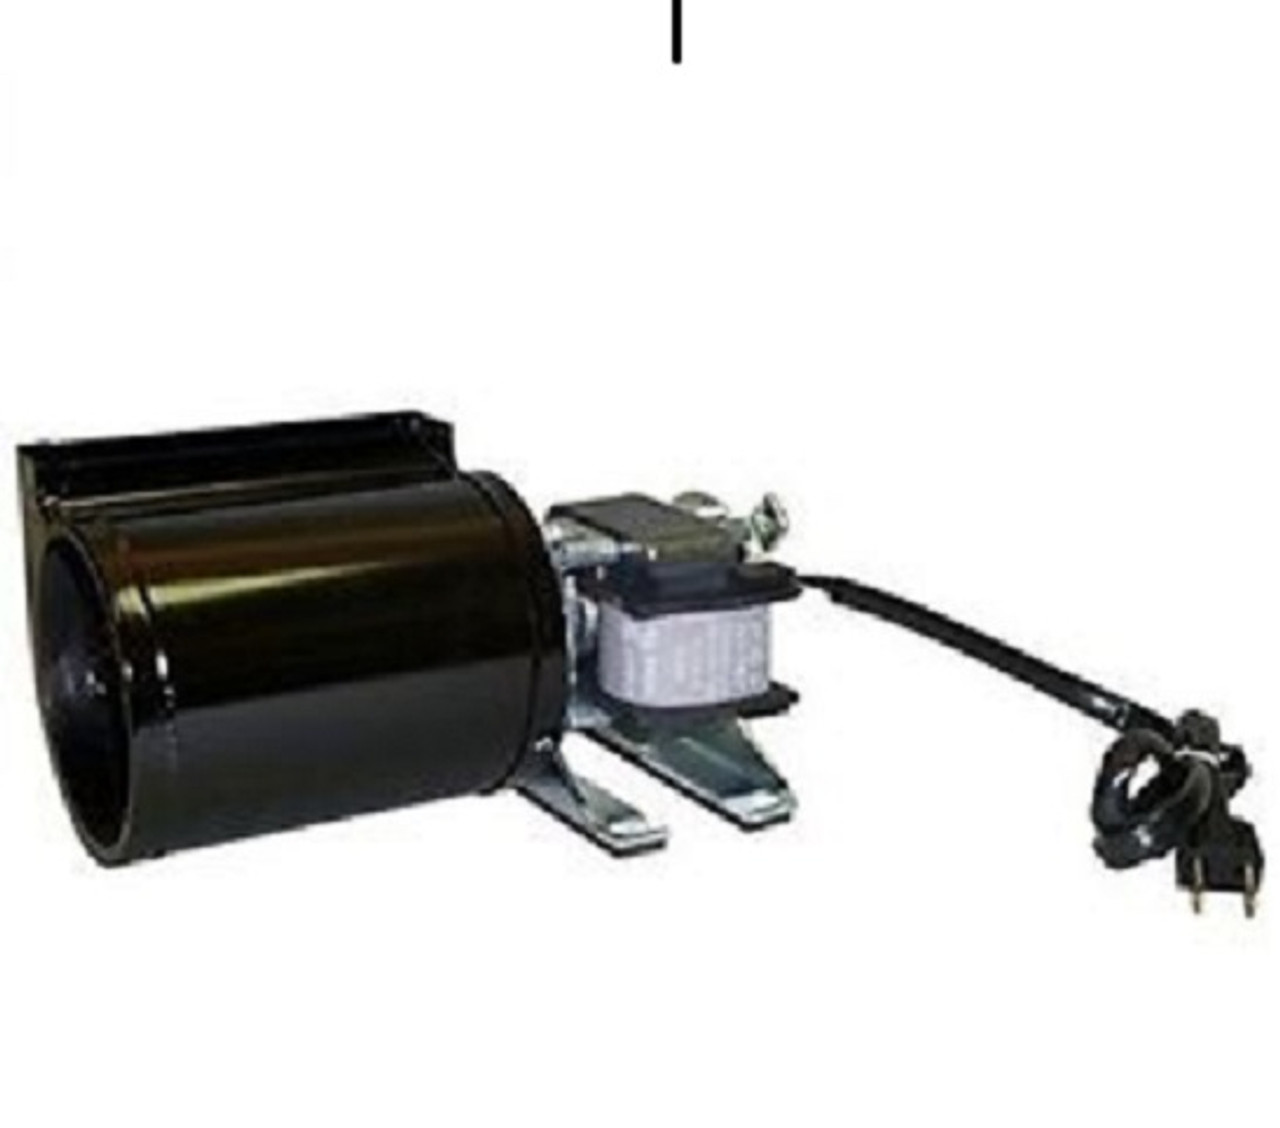 R7-RB130 Fireplace Blower Assembly